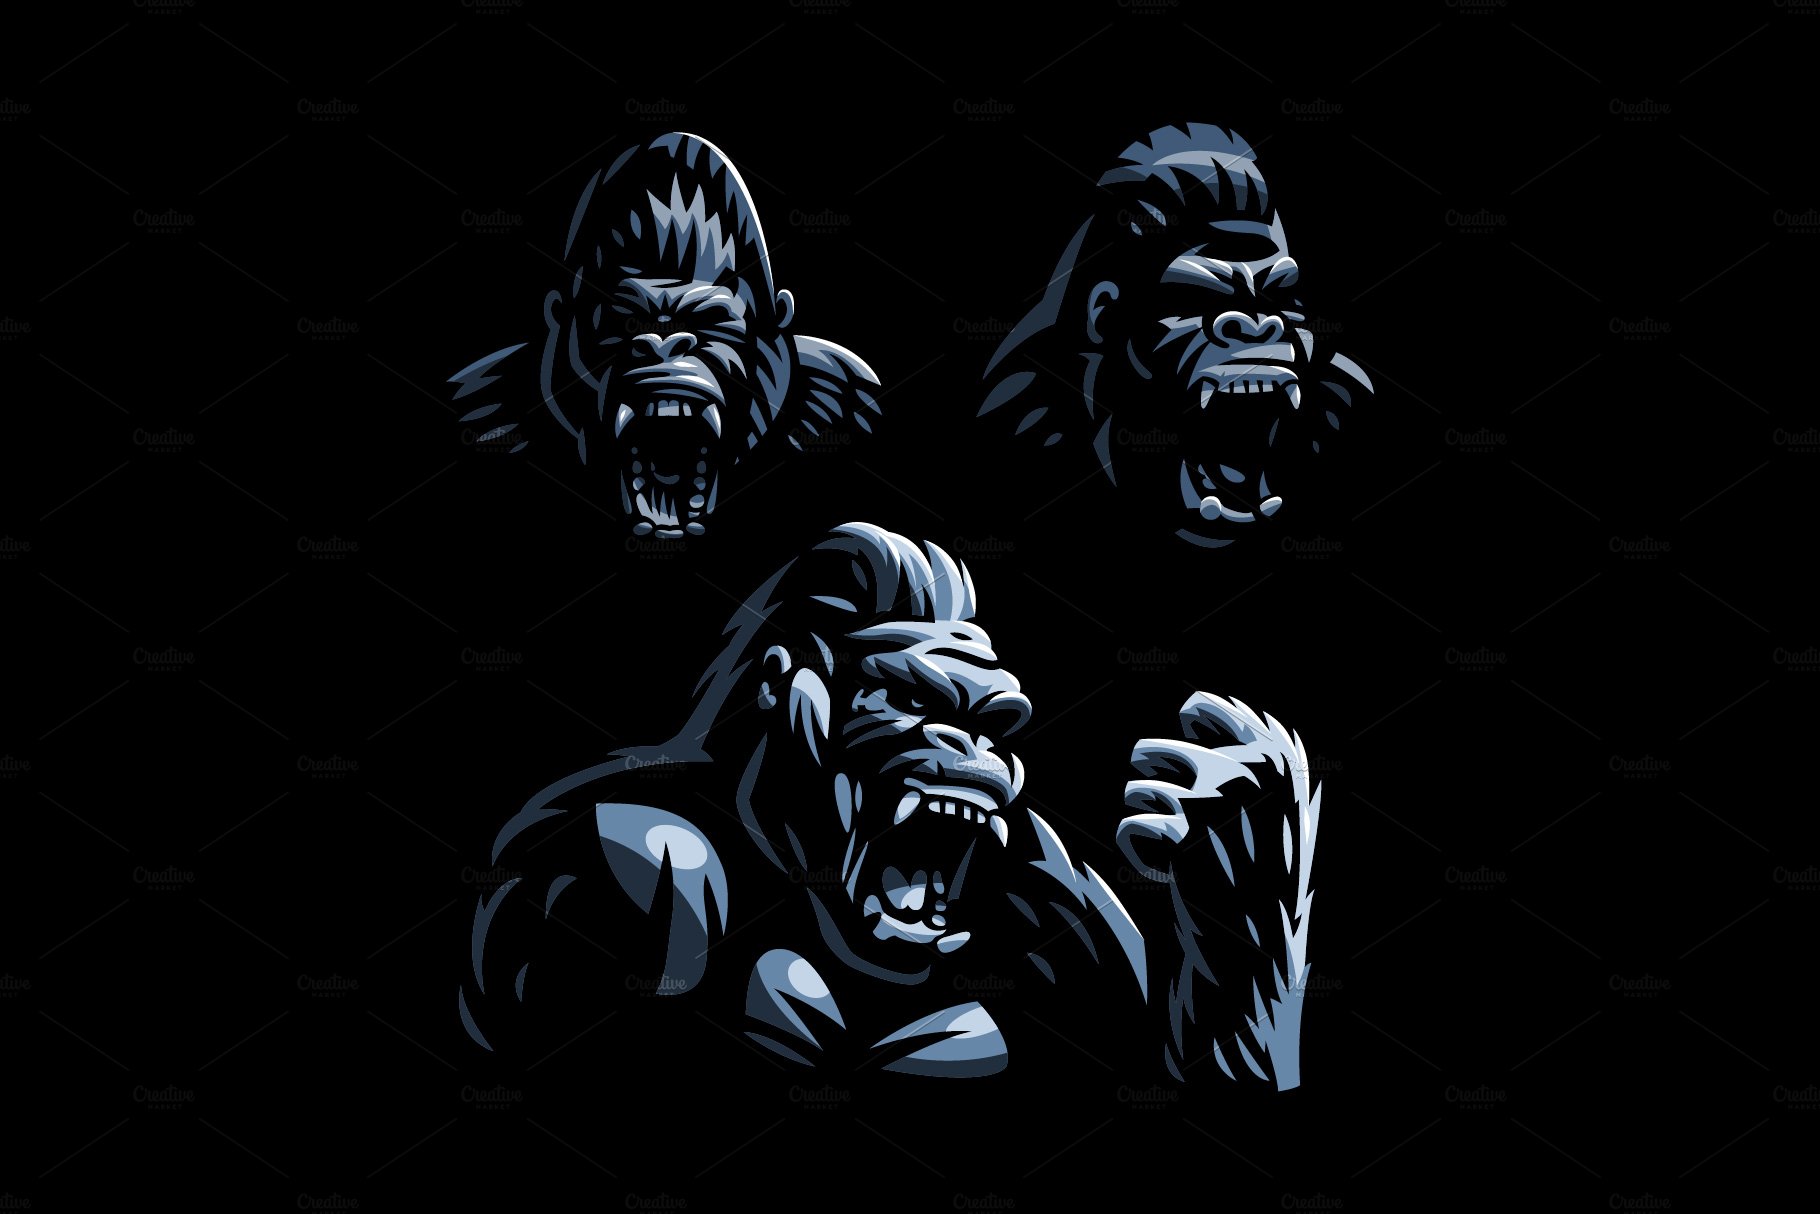 Angry gorilla cover image.